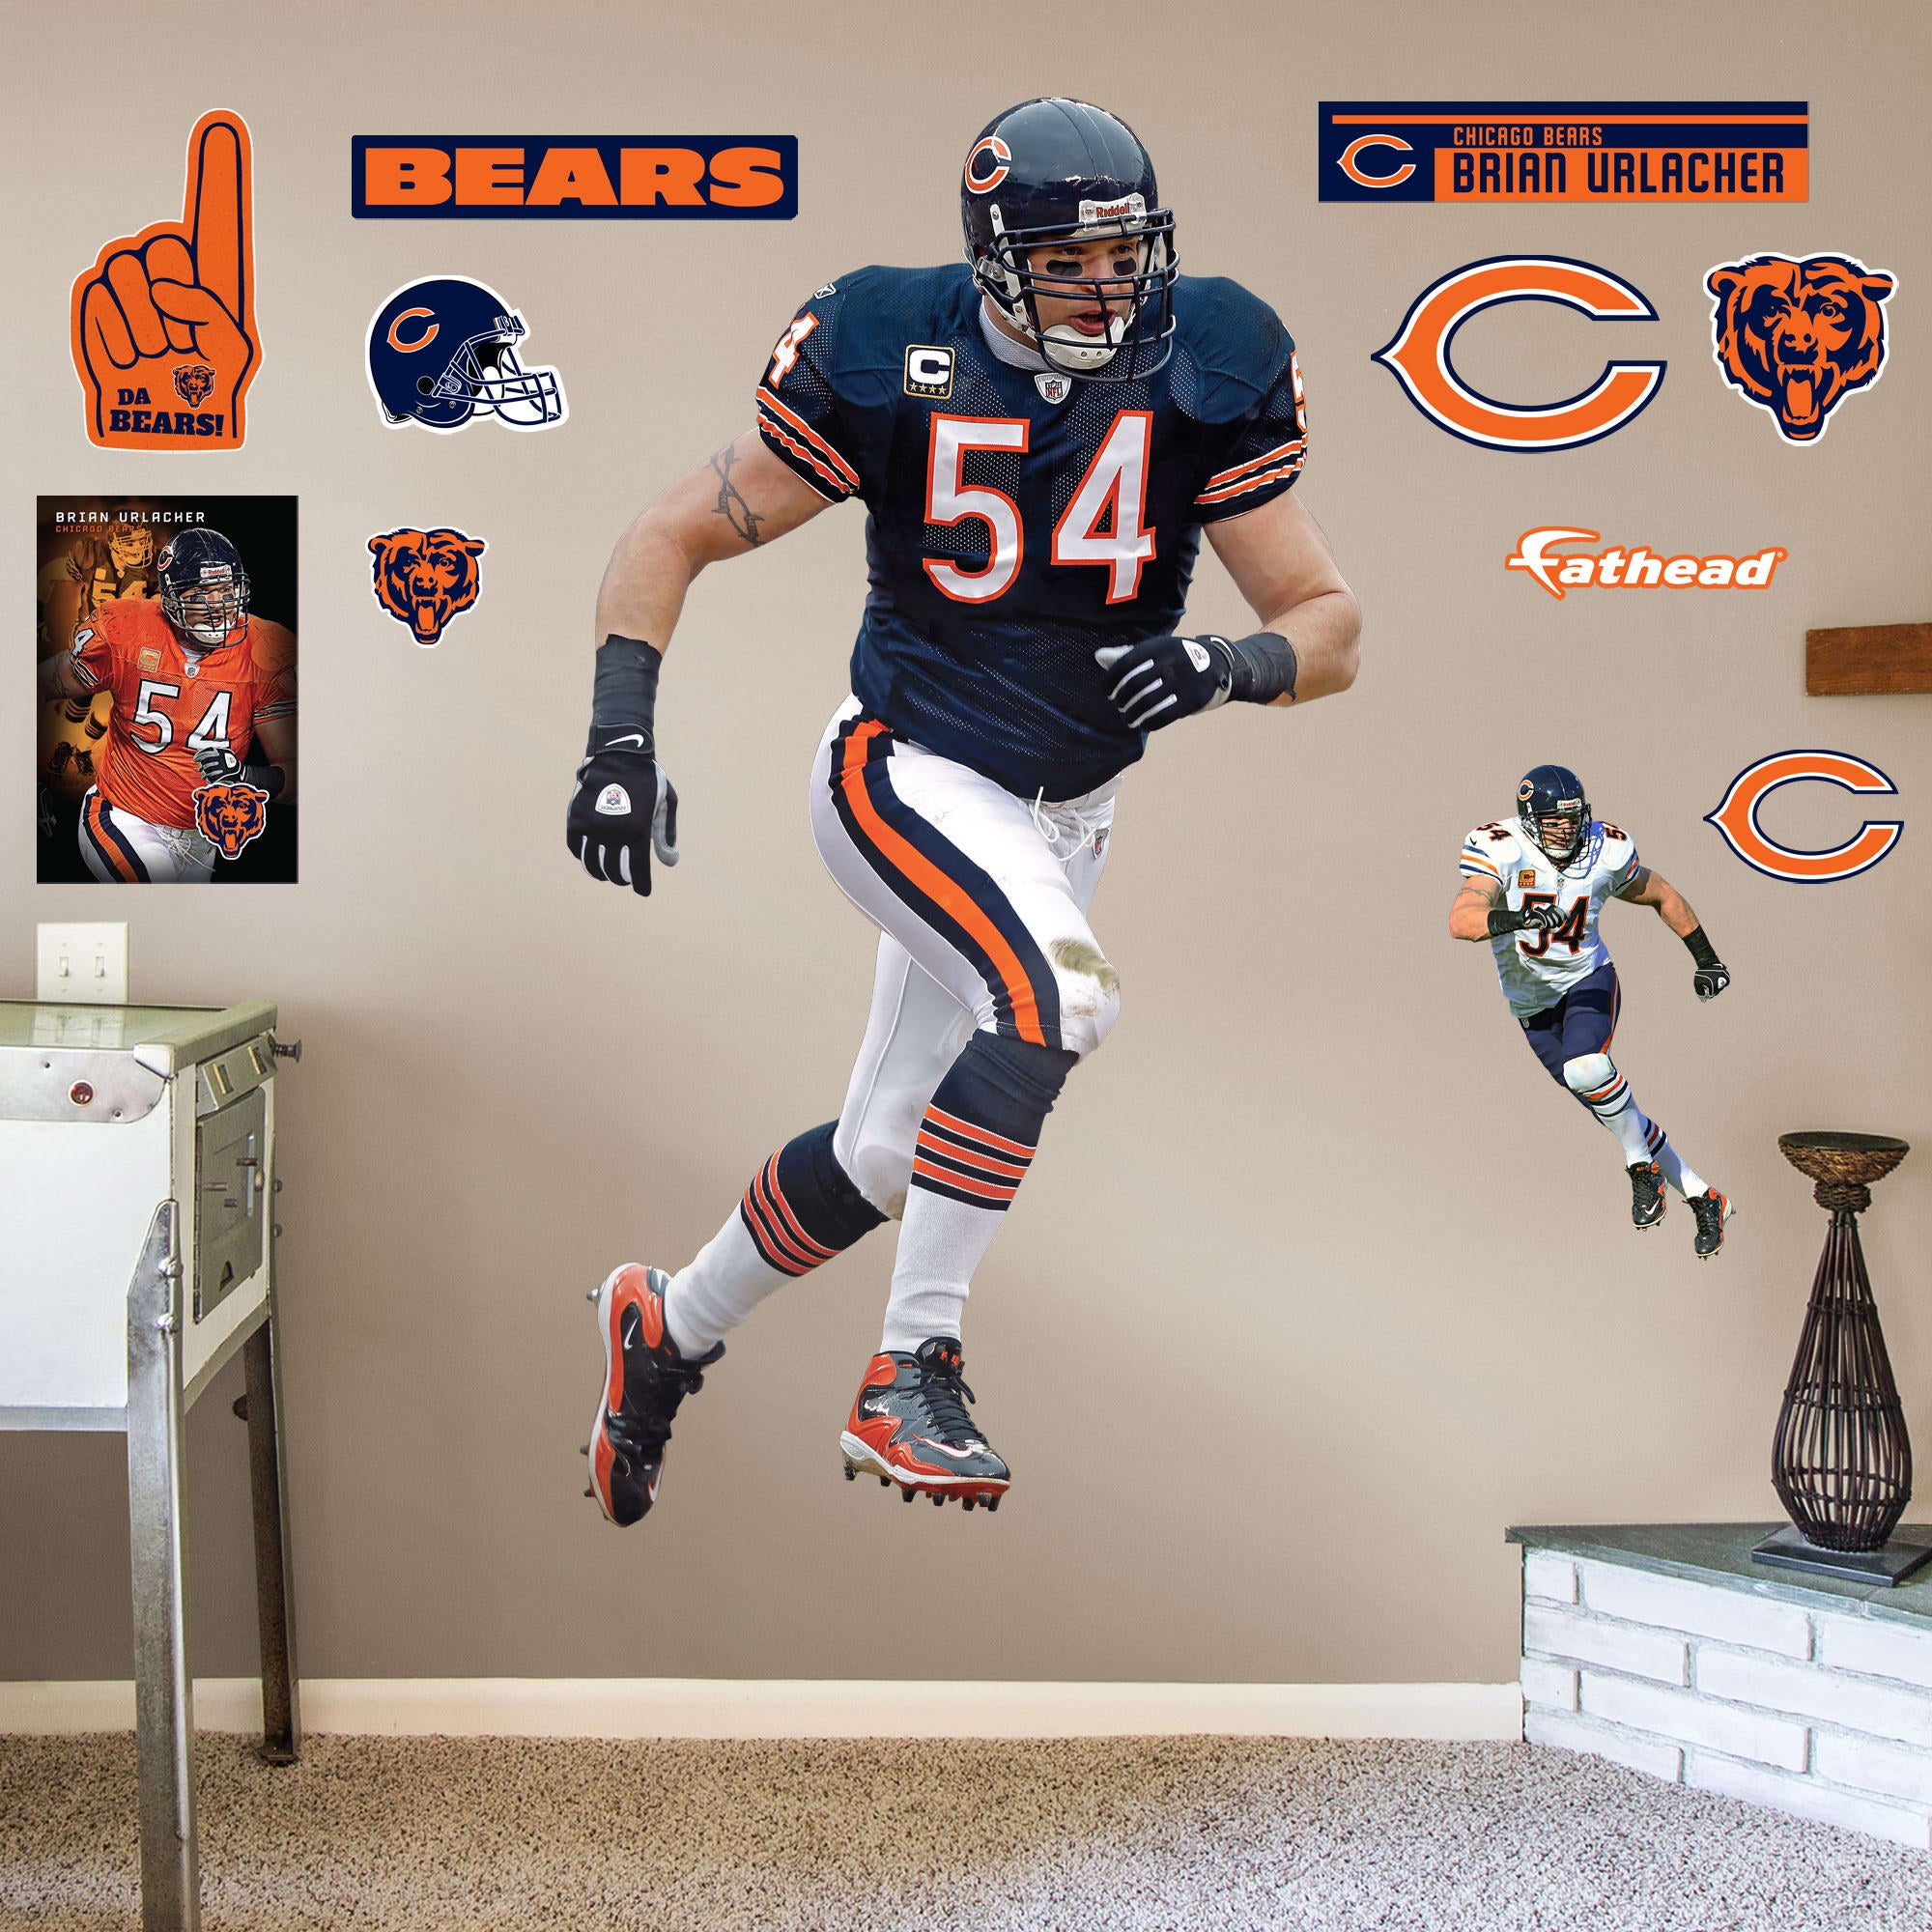 Brian Urlacher for Chicago Bears: Legend - Officially Licensed NFL Removable Wall Decal Life-Size Athlete + 11 Decals (43"W x 78